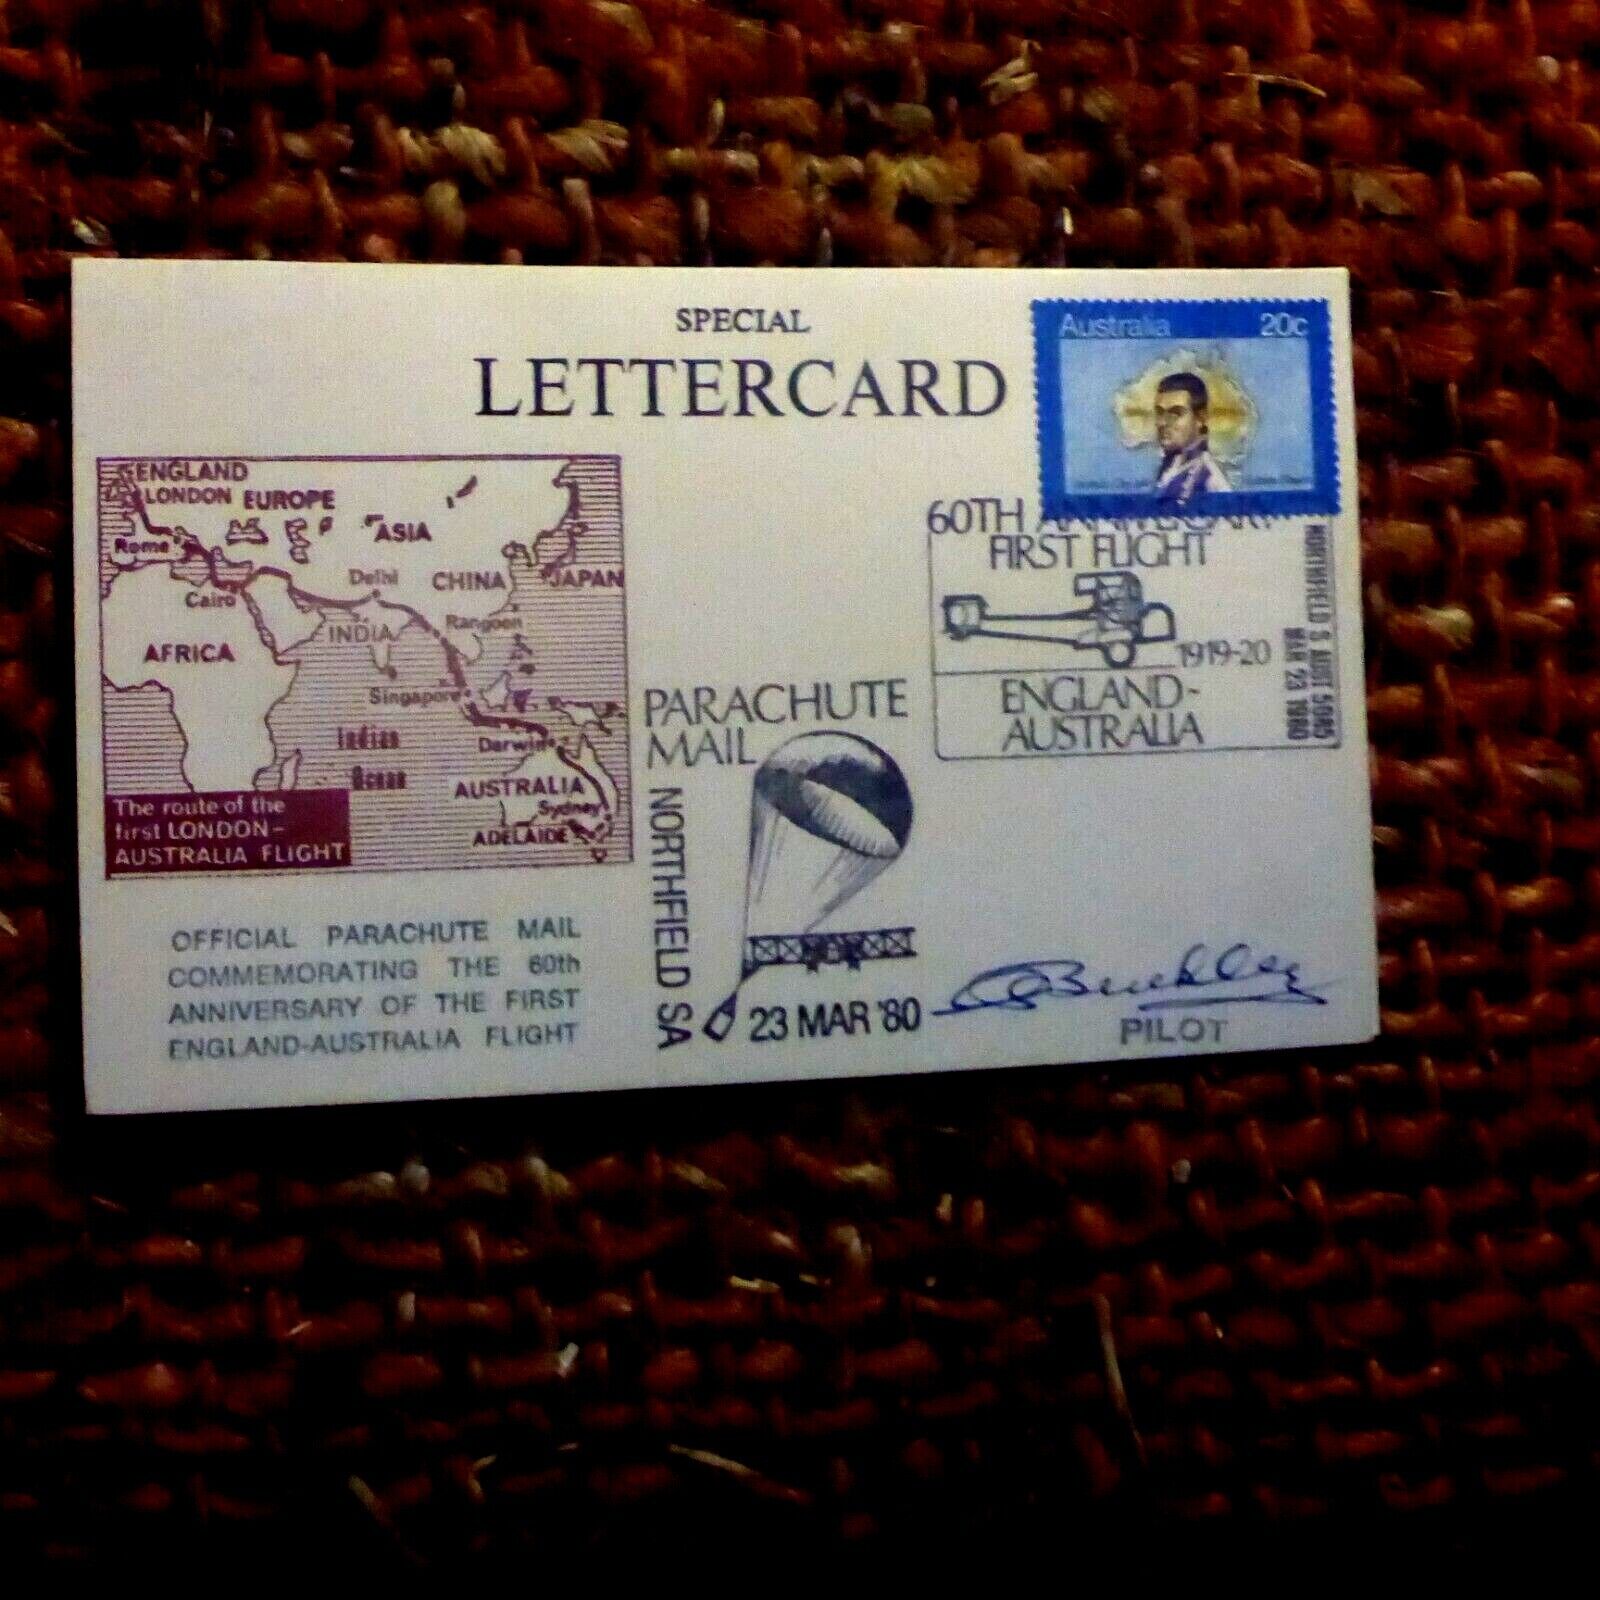 1980 Special Bergen lettercard 60TH ANNIV FLIGHT PARACHUTE MAIL signed by pilot